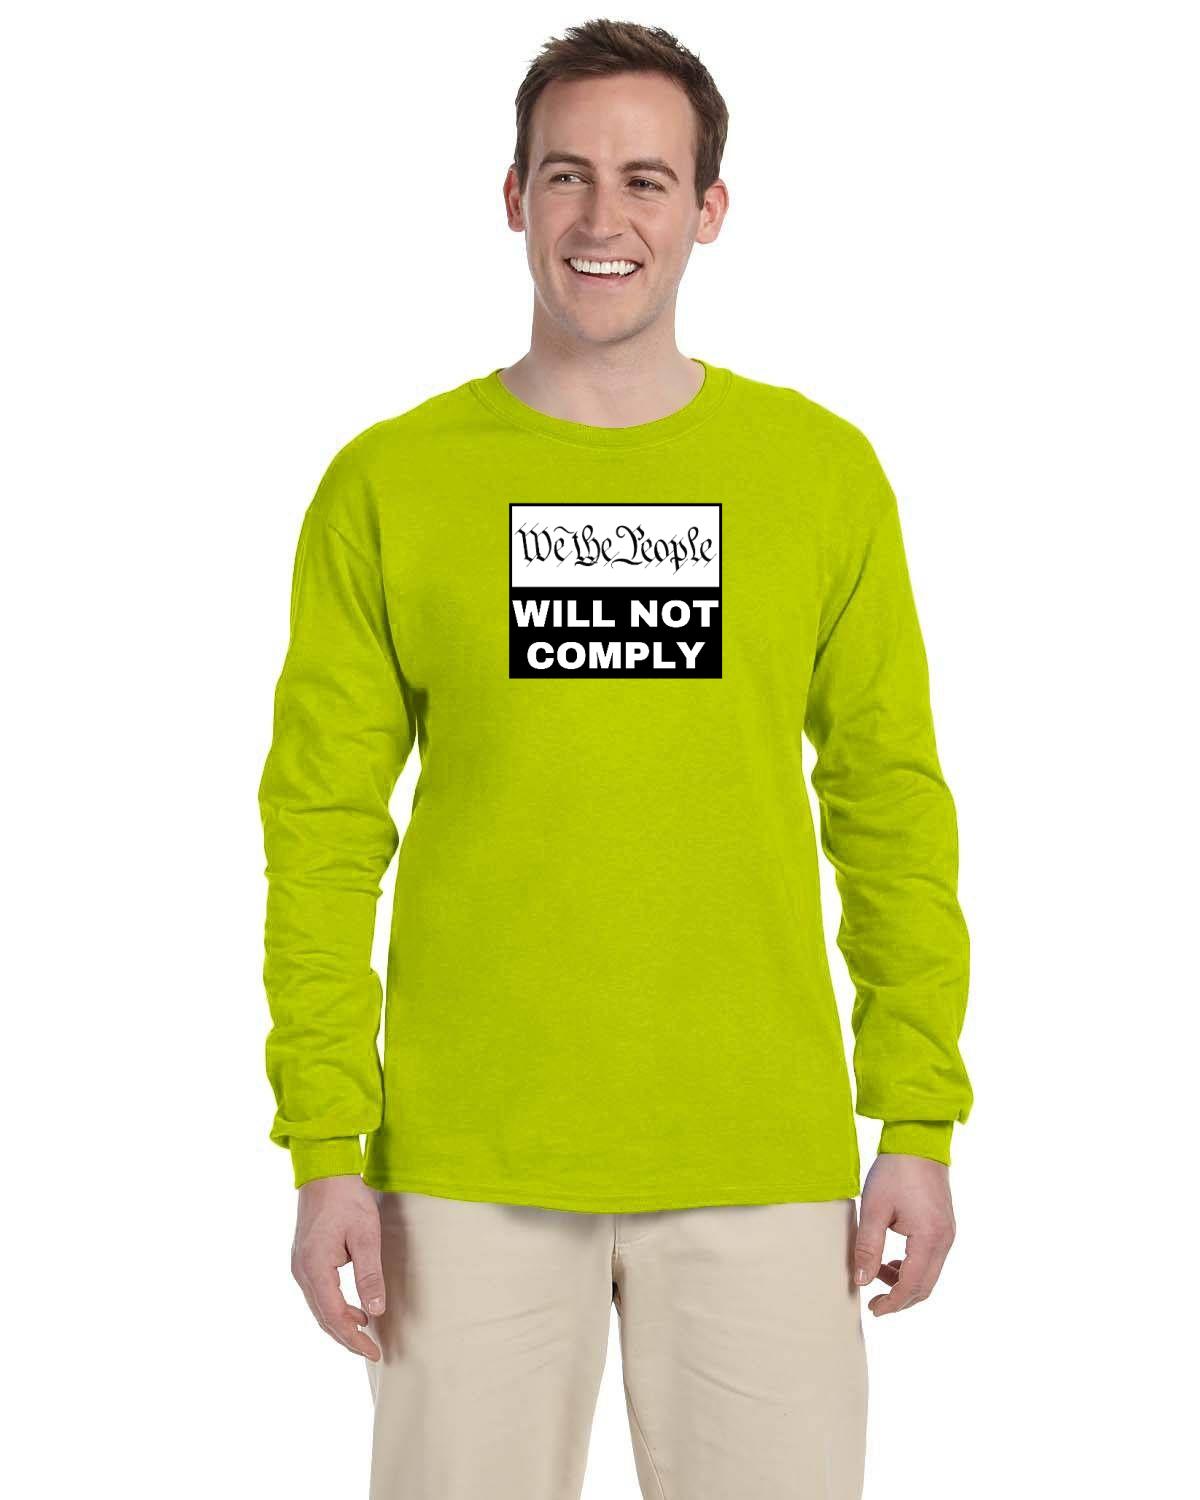 We The People Will Not Comply. Long-Sleeve T-Shirt